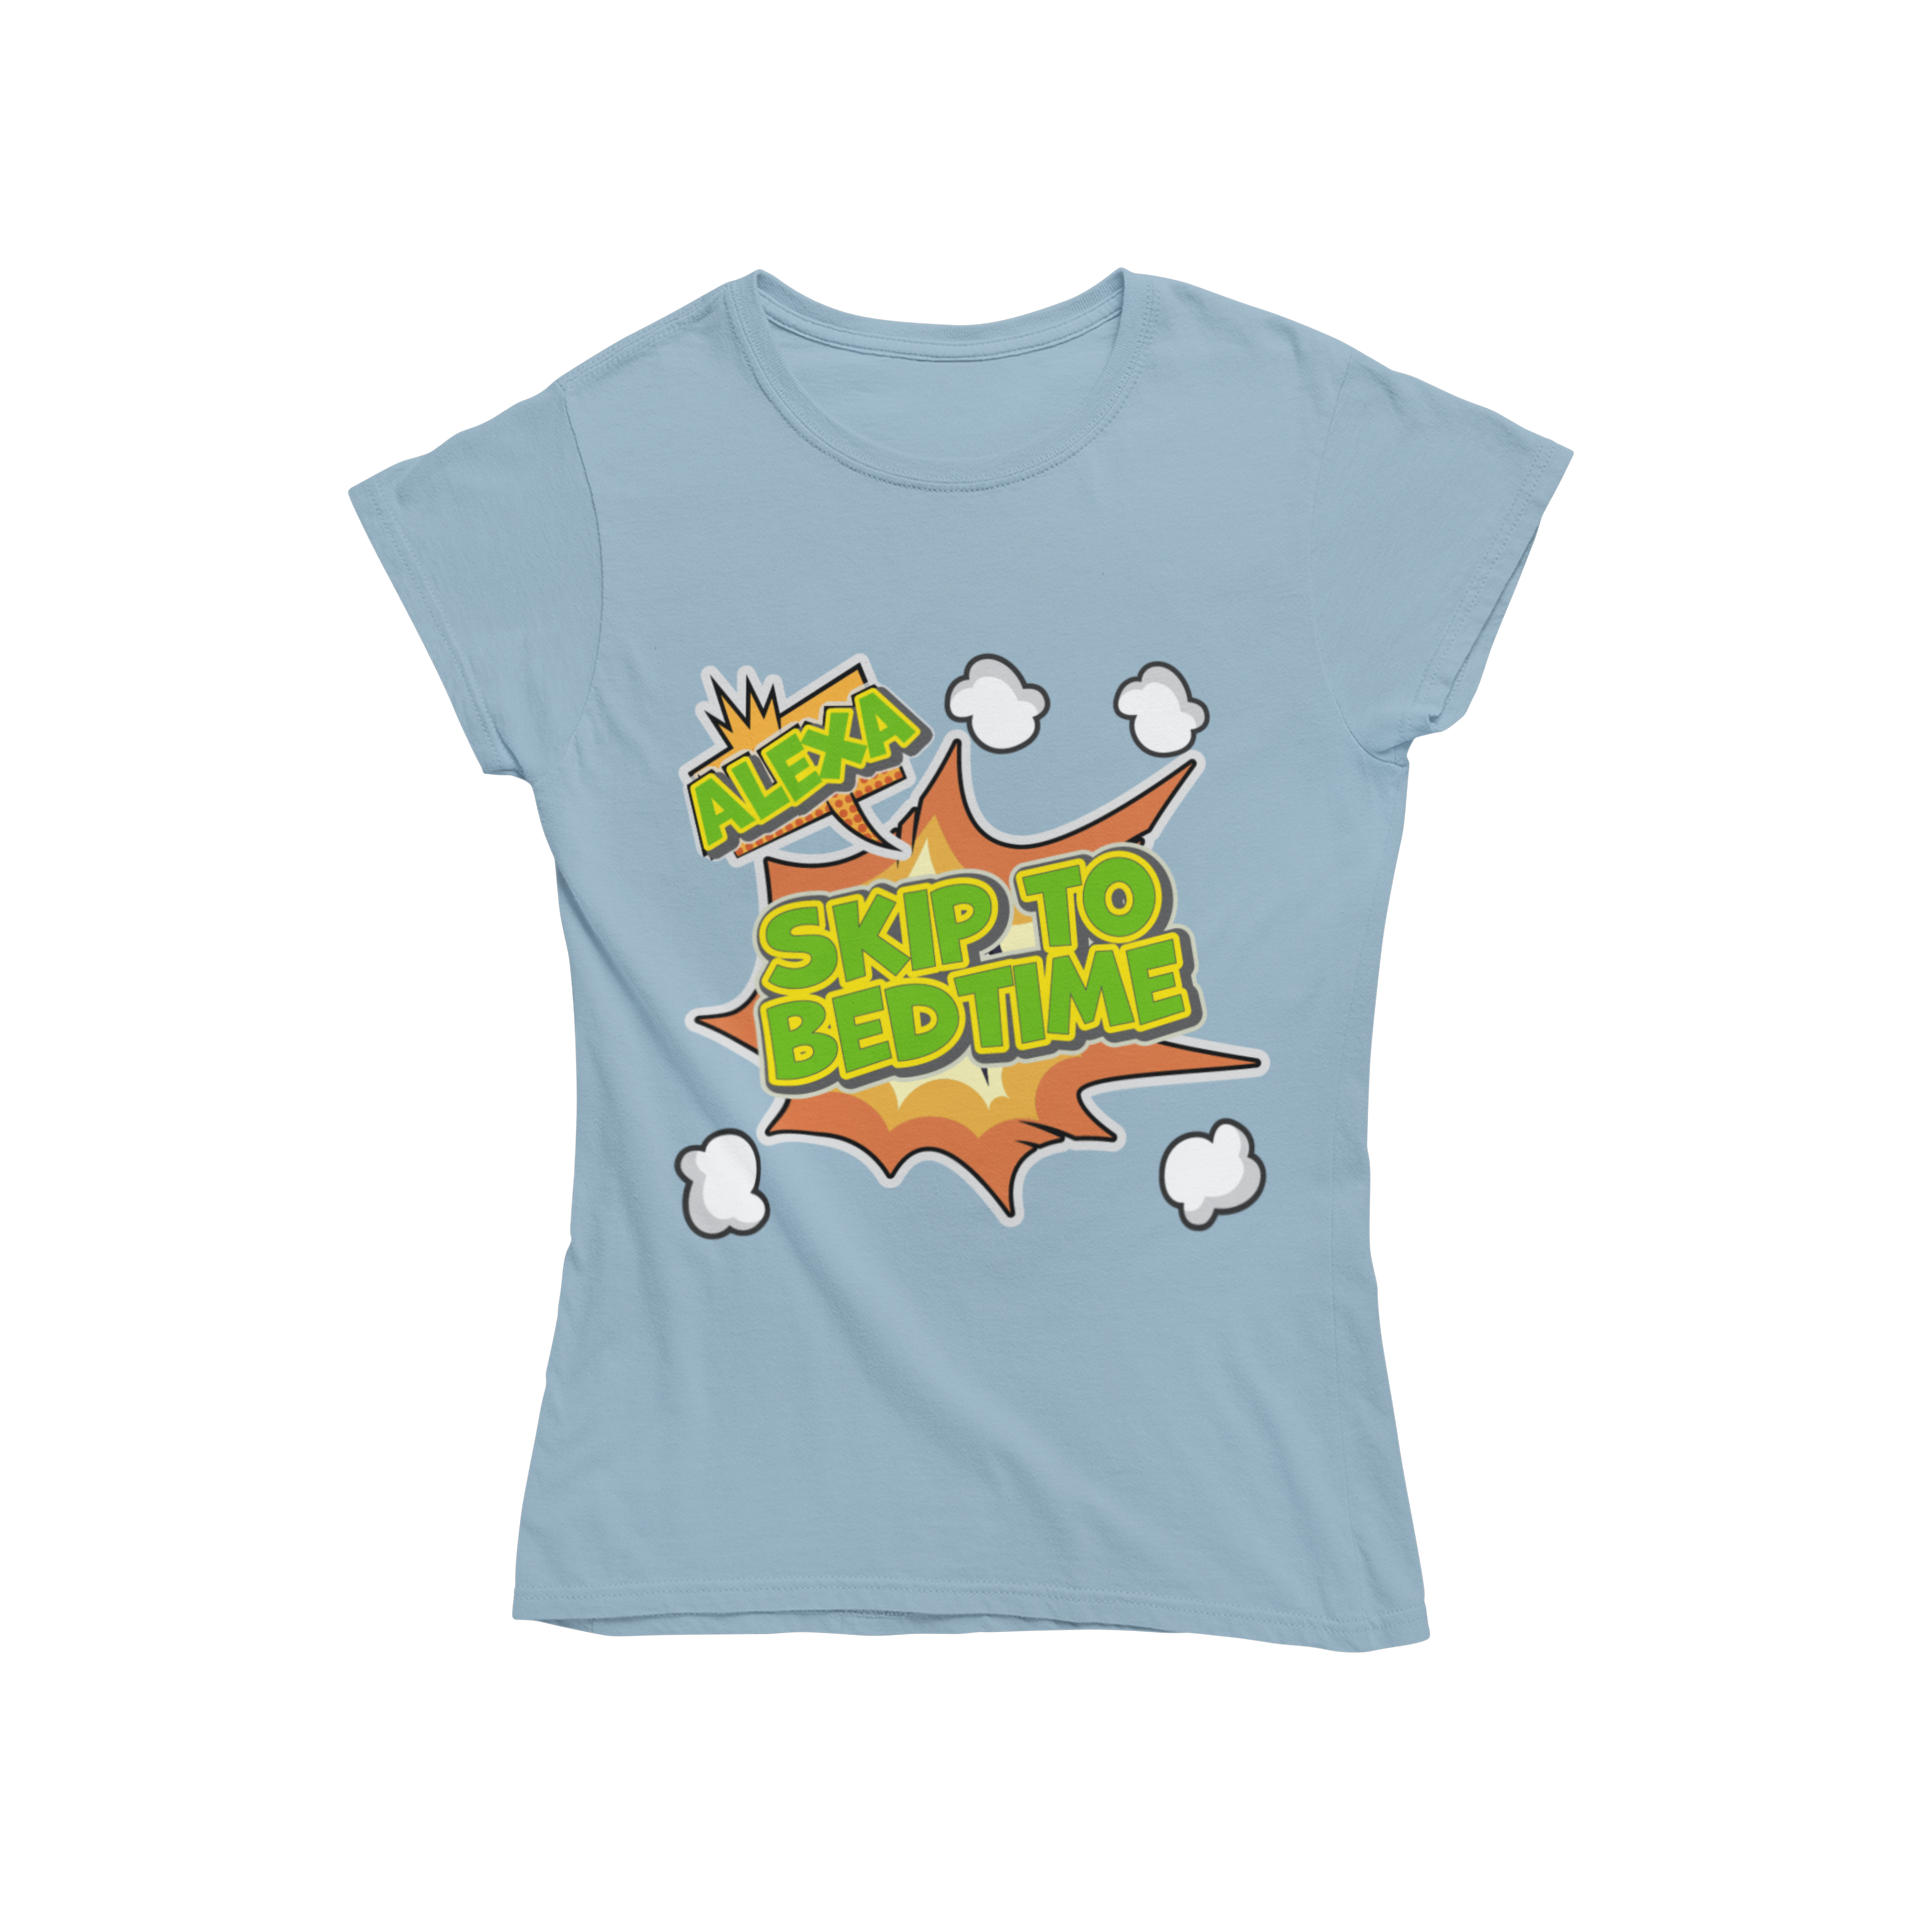 Looking for a fun and trendy t-shirt? Look no further than Teevolution! Our ladies fitted t-shirt features the catchy phrase "Alexa skip to bedtime". Stay comfortable while making a statement with this stylish shirt. Order yours today!